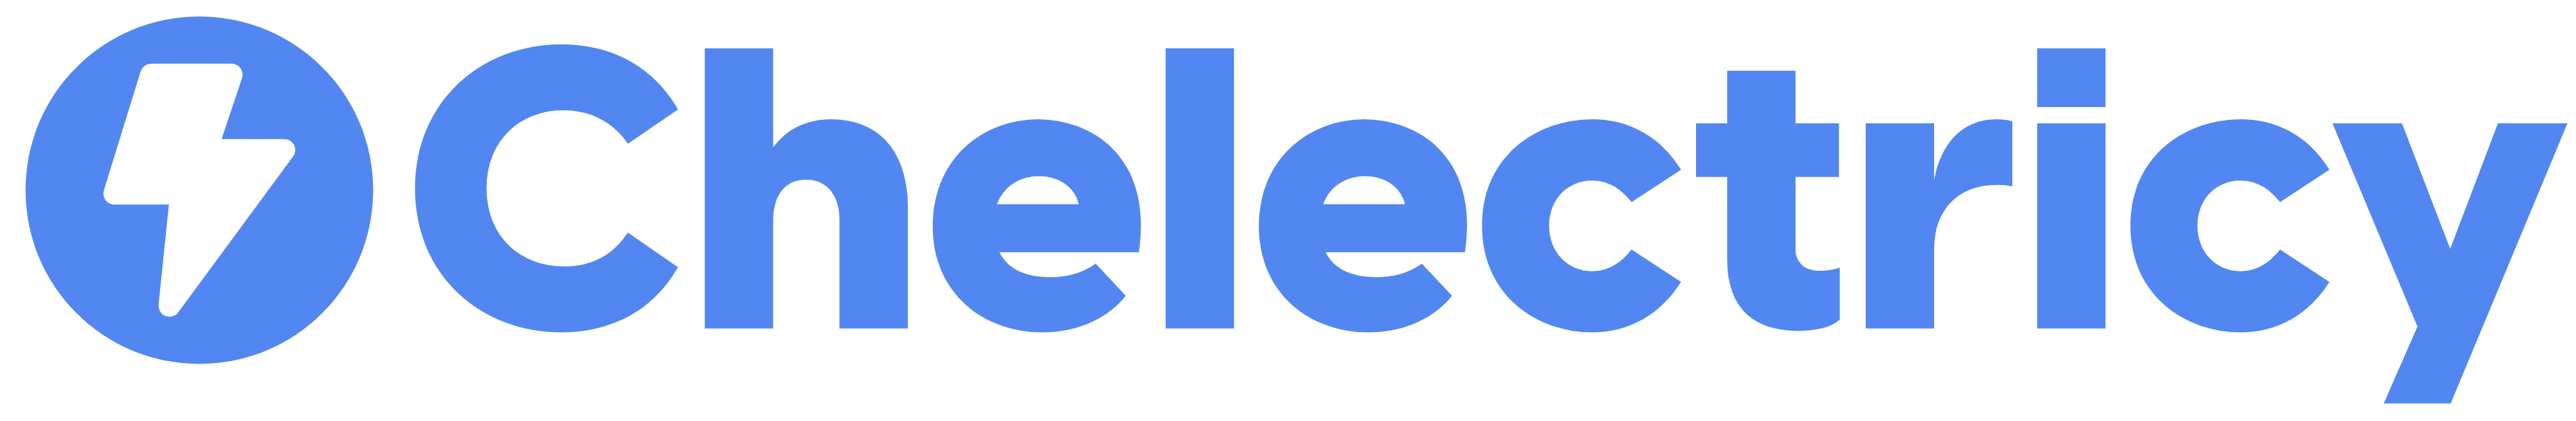 Chelectricy